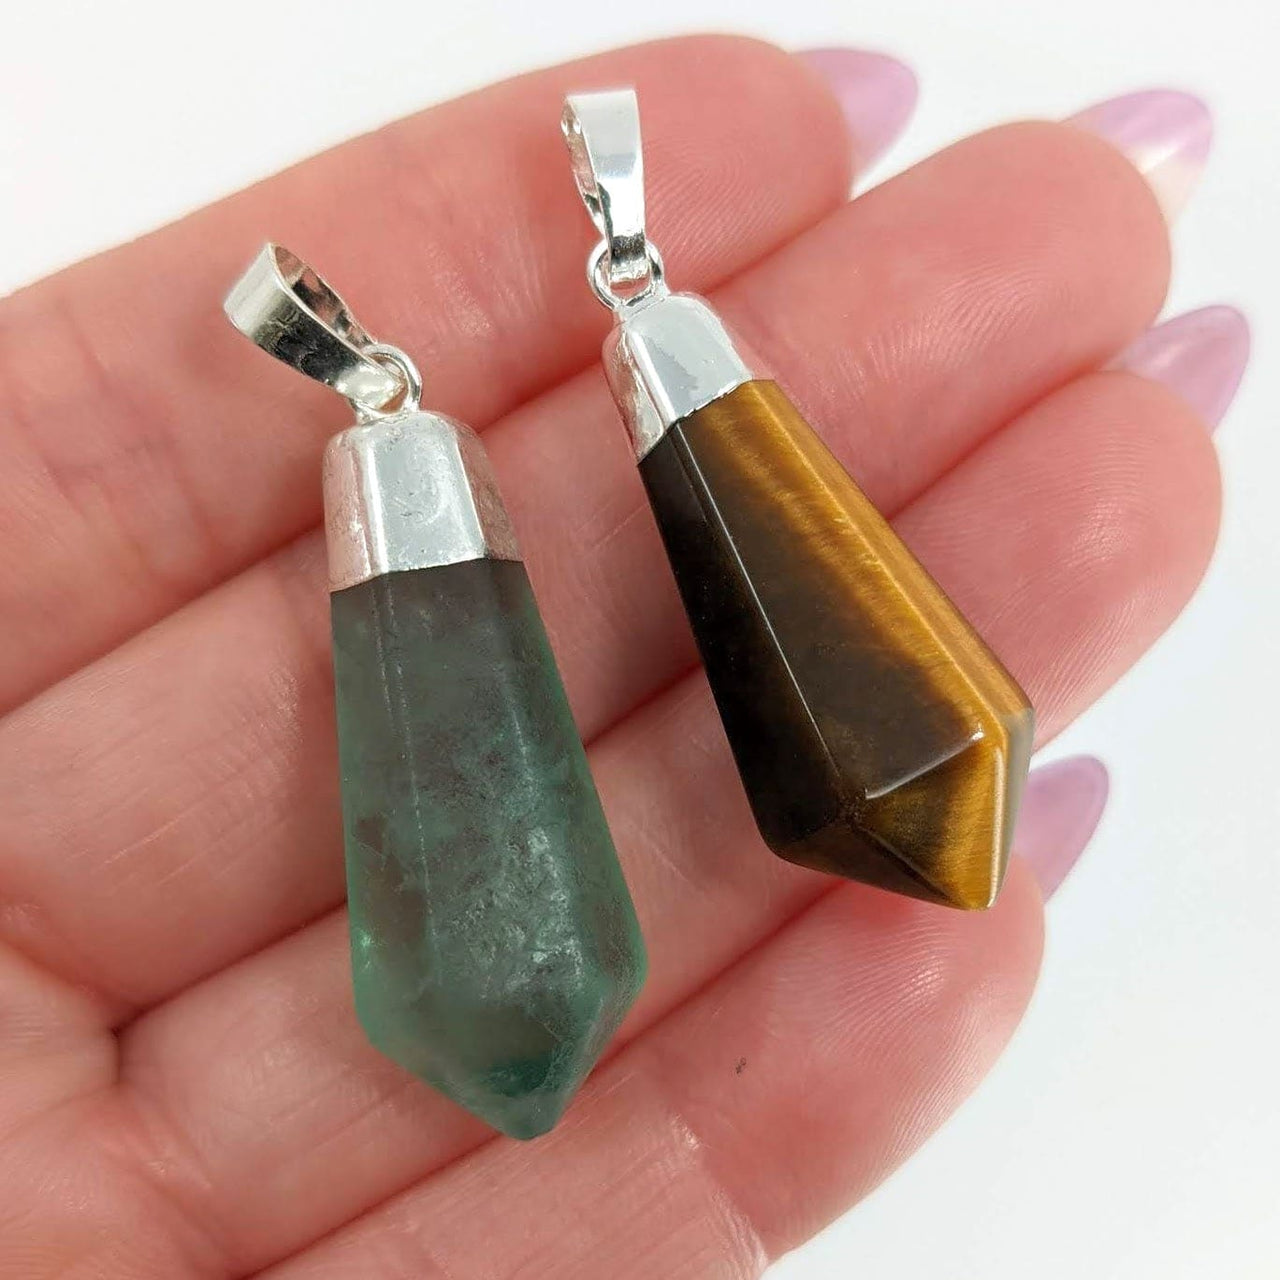 Tapered Point Pendant Fluorite or Tigers Eye (8g) #SK7520 - 